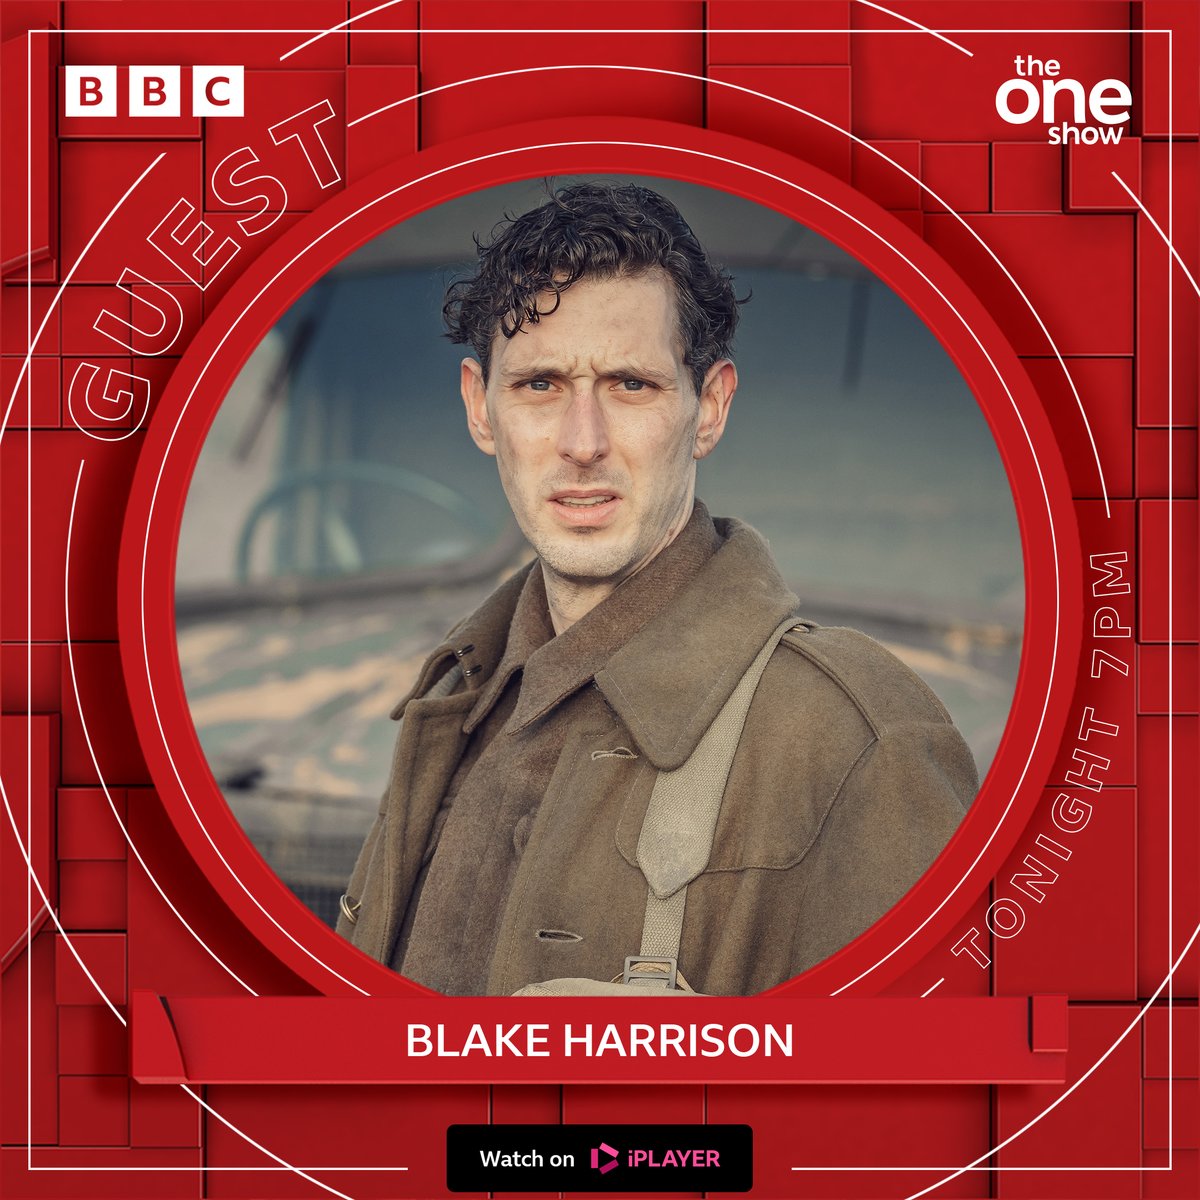 🎬 Stars of #WorldOnFire, @BlakeHarrison23 and @CelSpellman are joining us in #TheOneShow studio to tell us all about the new series! 💥 Got a question for them? Let us know below 👇 or email theoneshow@bbc.co.uk 📩 @WorldOnFireTV